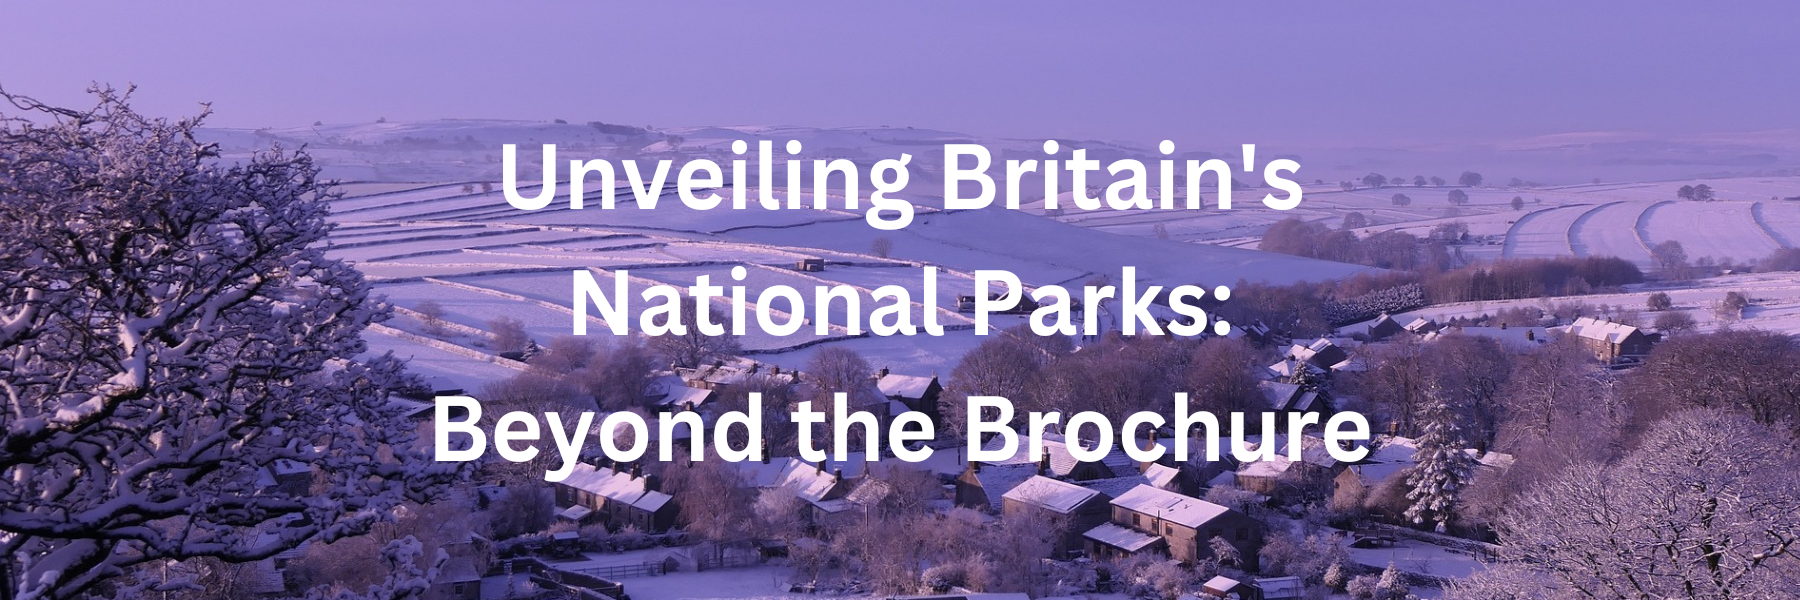 Unveiling Britain's National Parks Beyond the Brochure